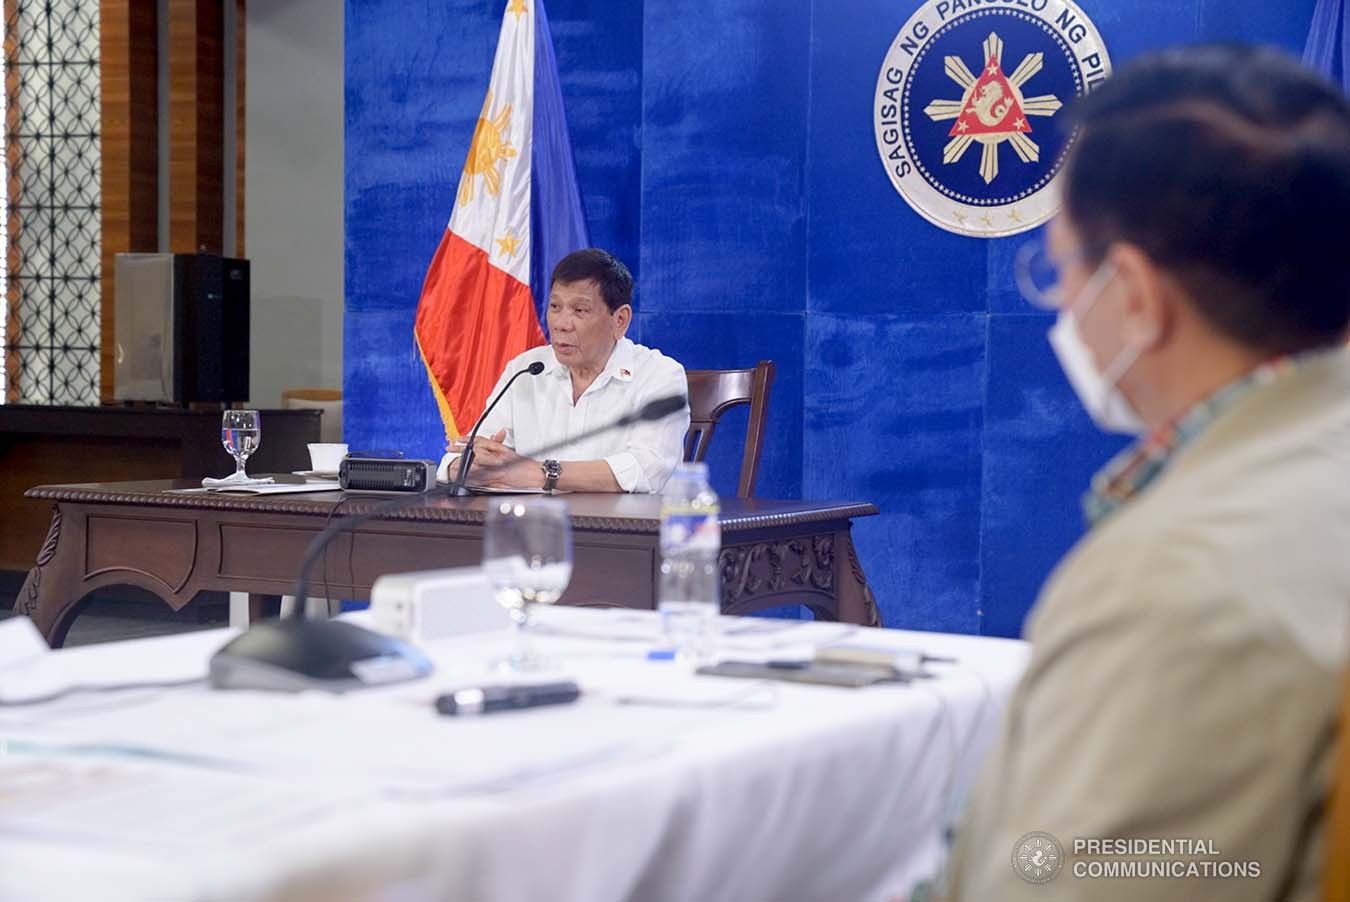 Duterte reminded: COA an independent body, necessary check on state spending